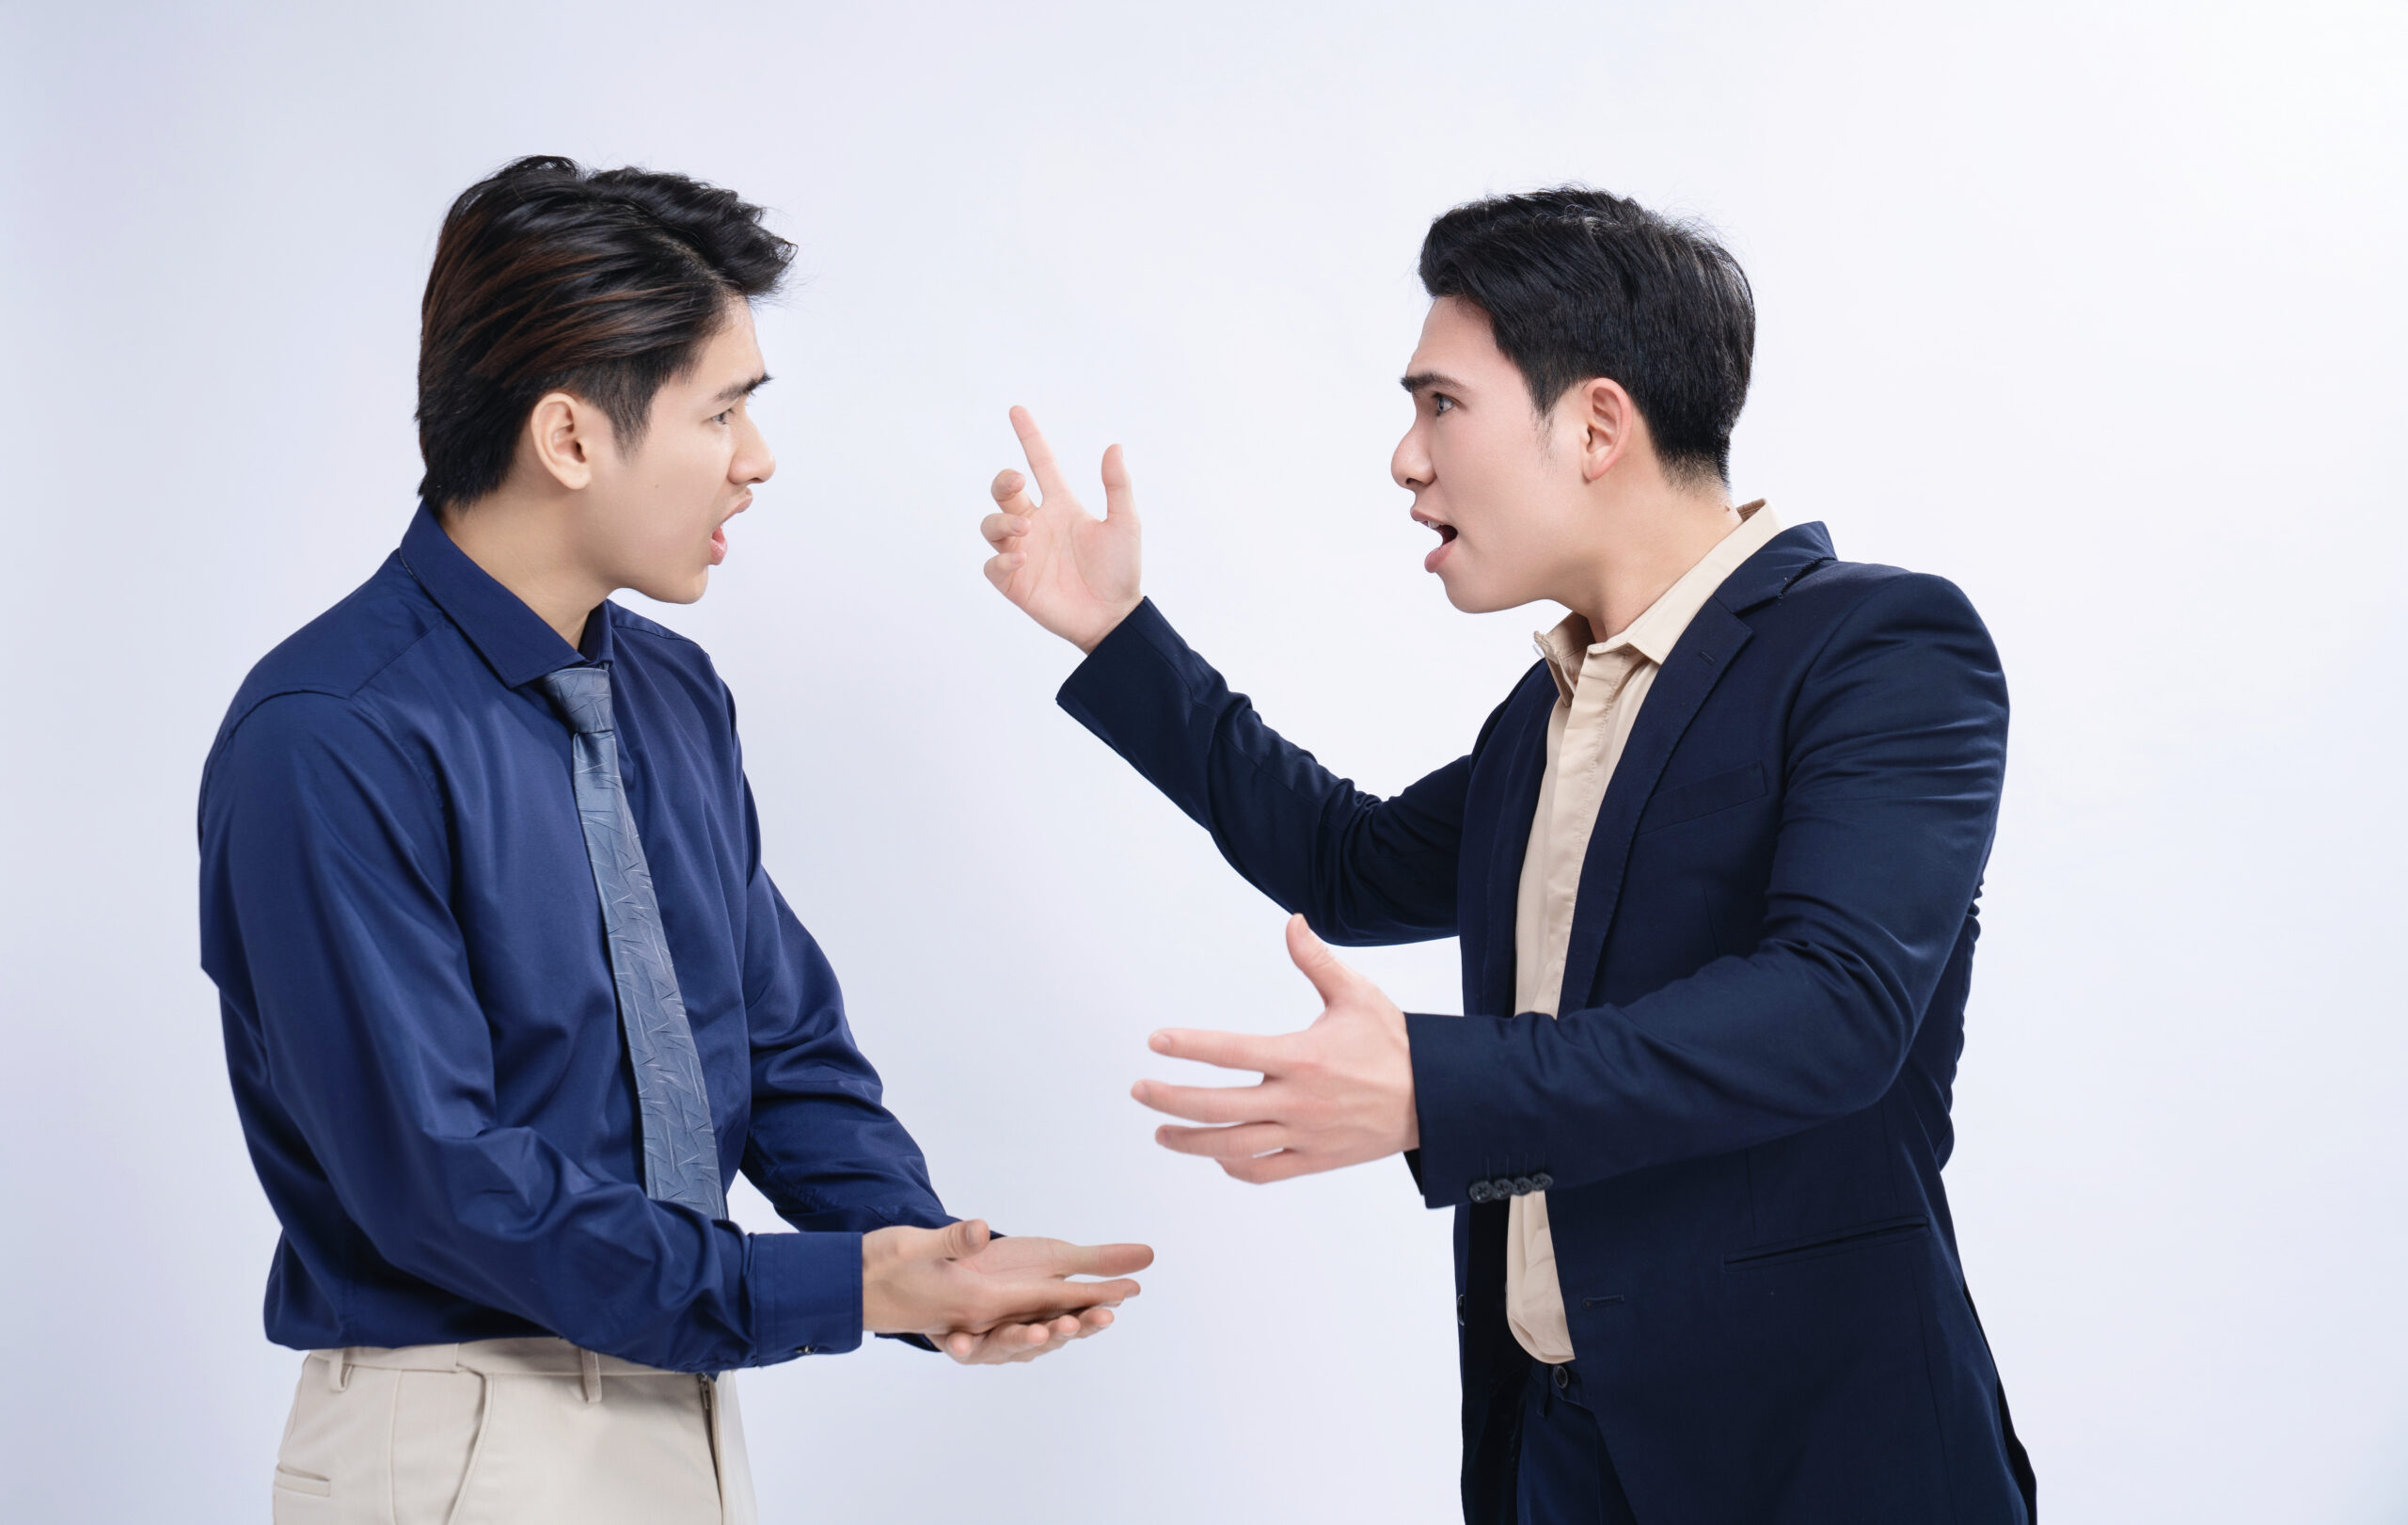 Two men arguing with each other